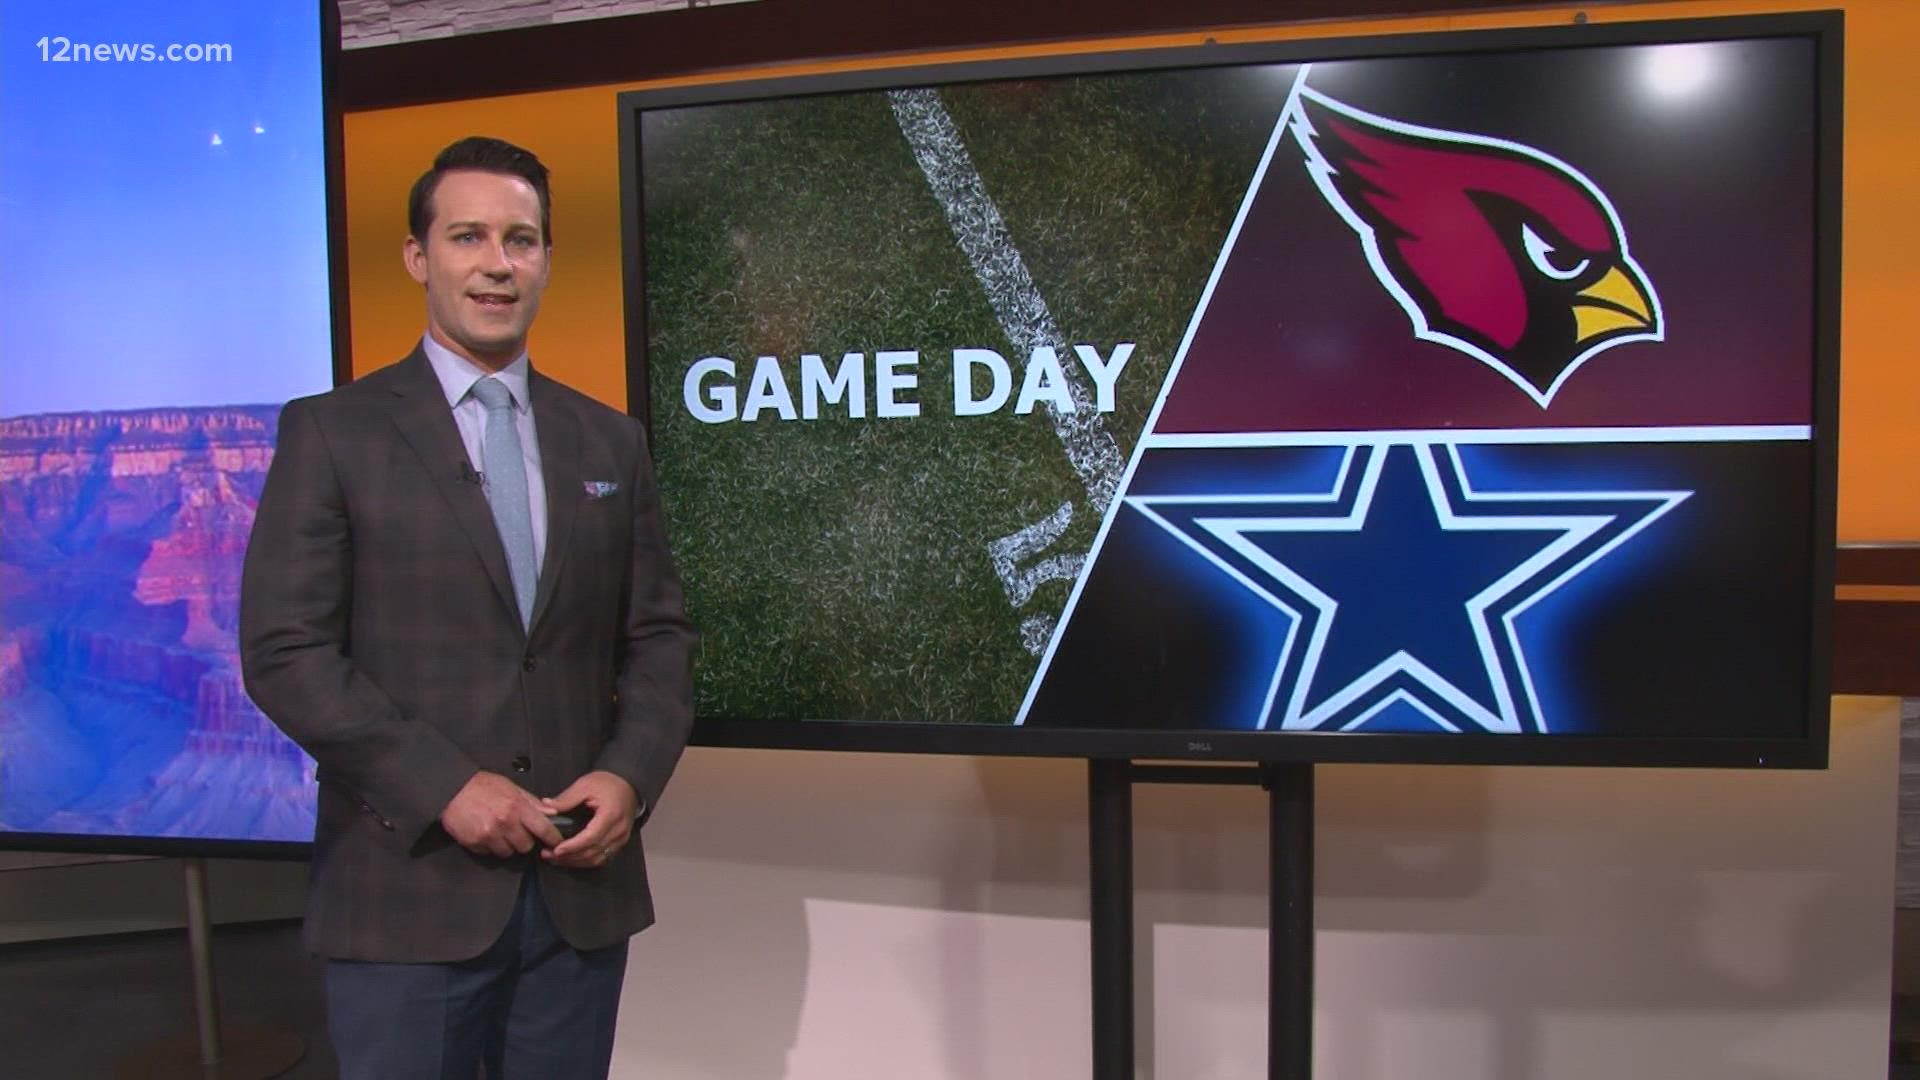 The Arizona Cardinals take on the Dallas Cowboys in the first pre-season game of 2021. Ryan Cody tells us what we can expect from the game.